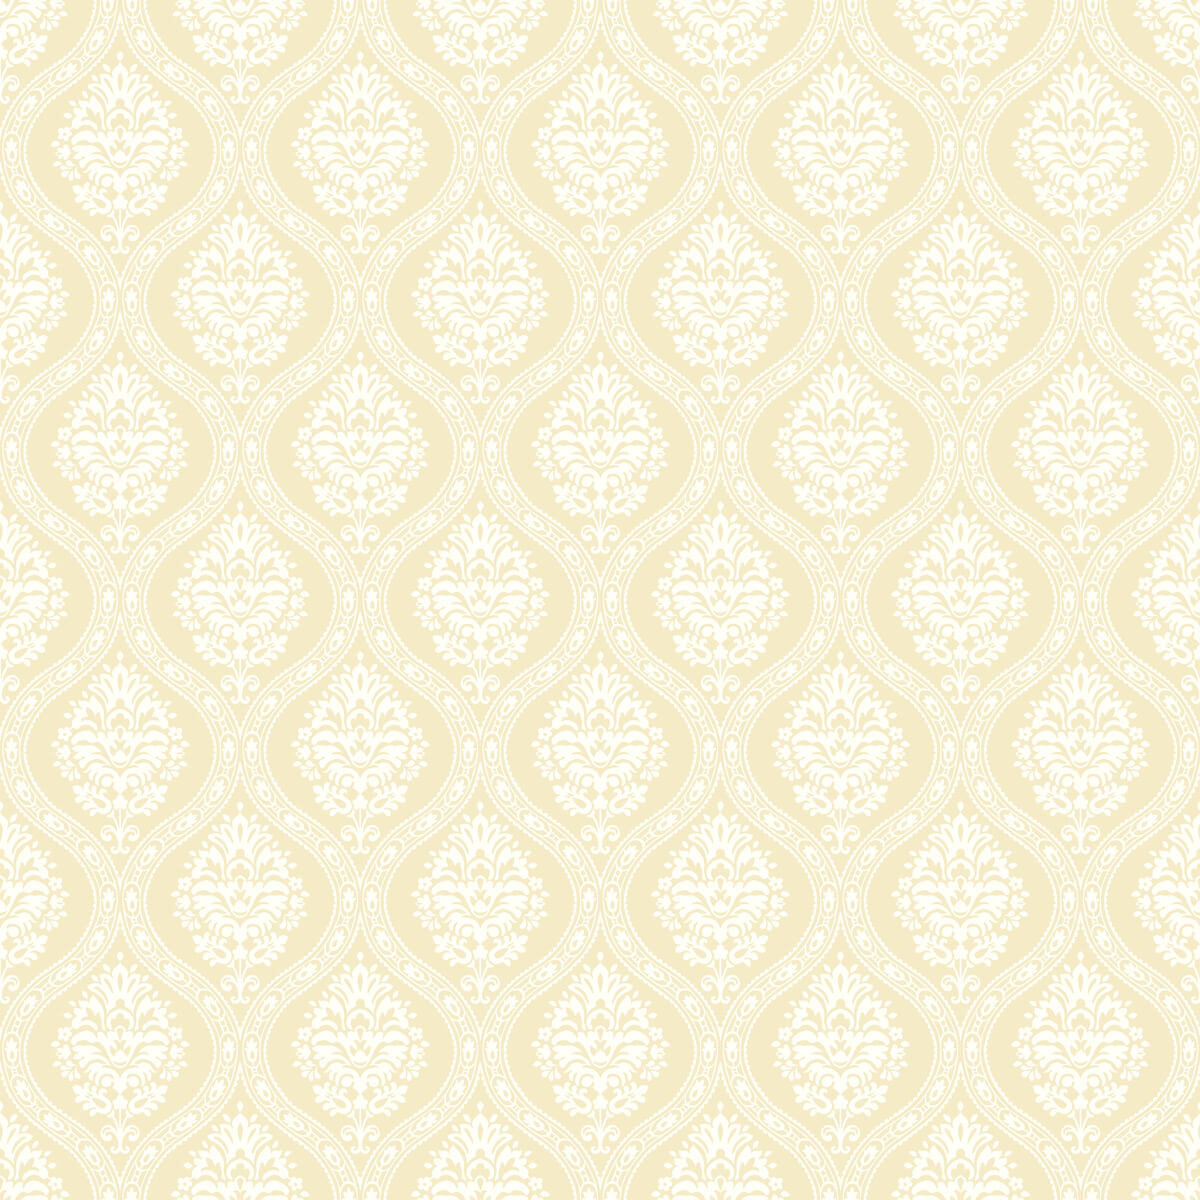 Damask Resource Library Petite Ogee Wallpaper - SAMPLE